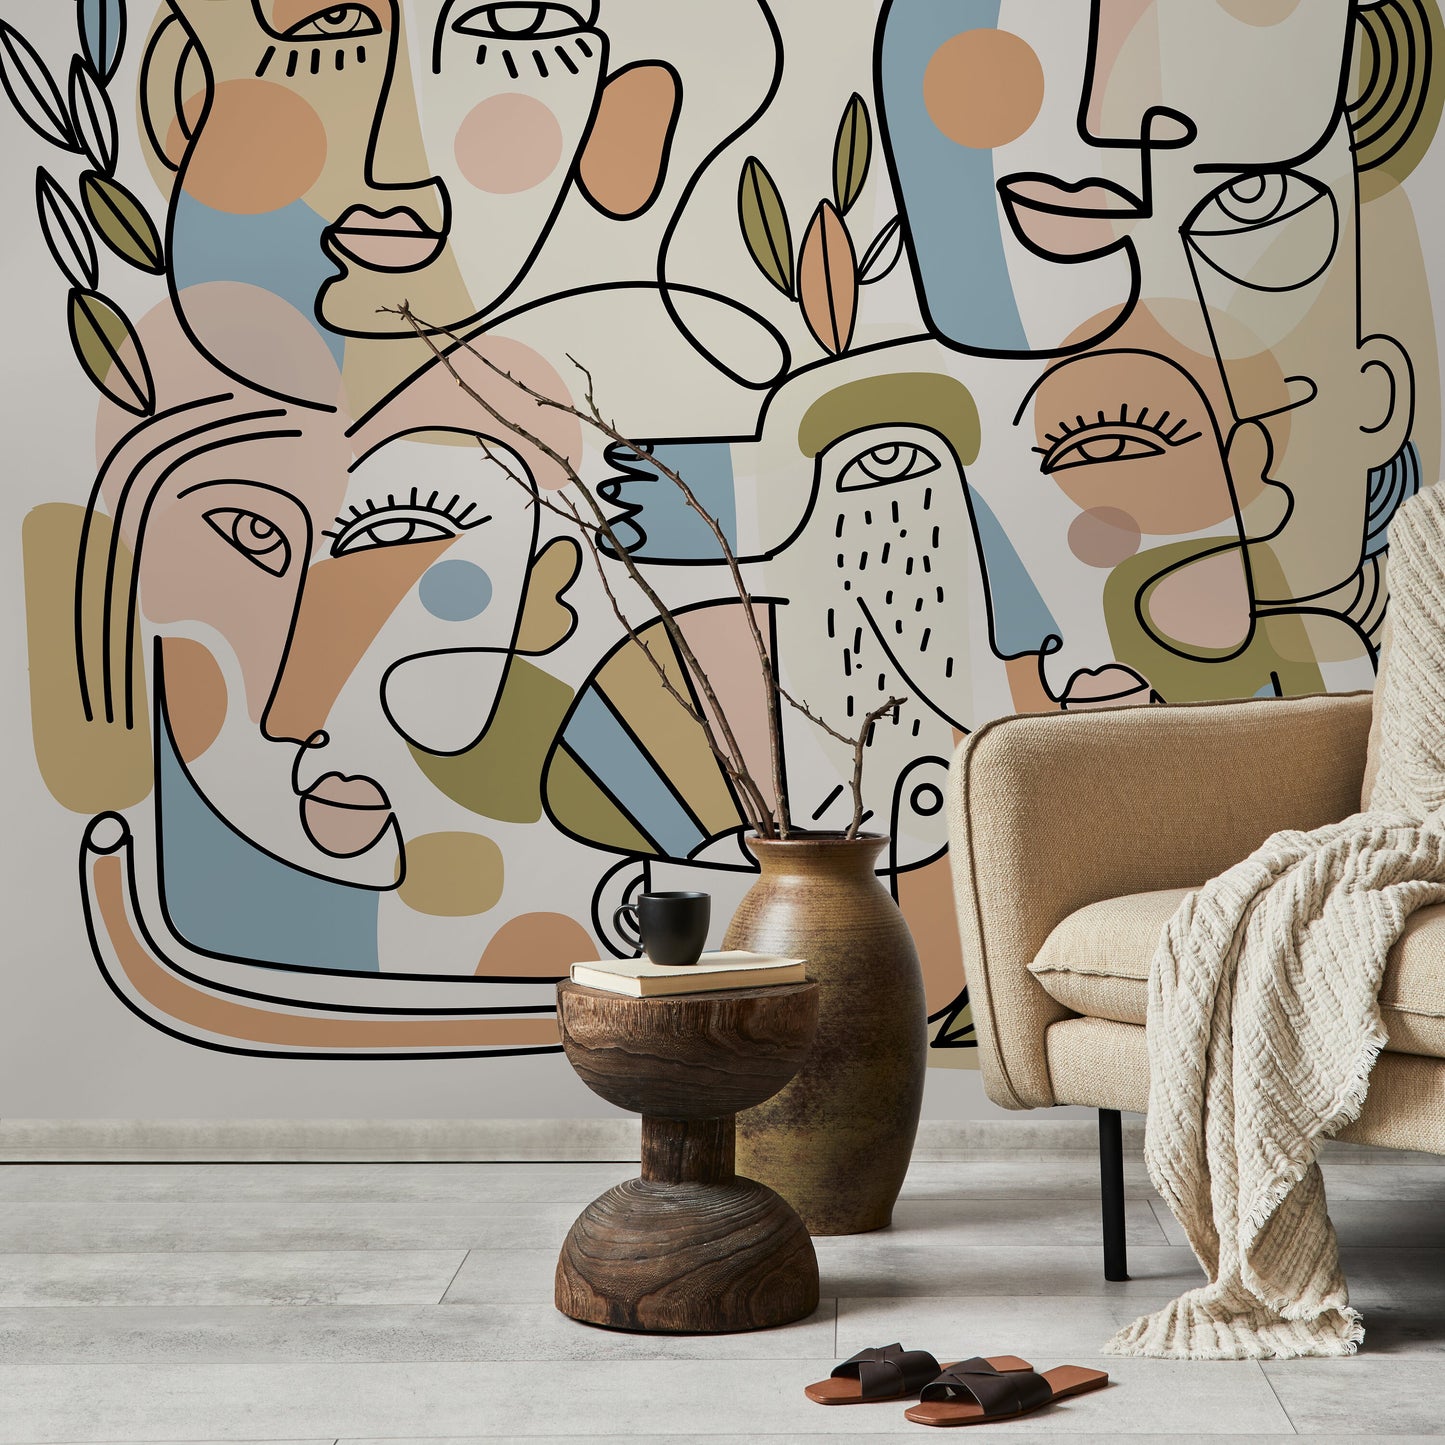 Contemporary Line Art Faces Wallpaper Abstract Mural Peel and Stick Wallpaper Home Decor - D558